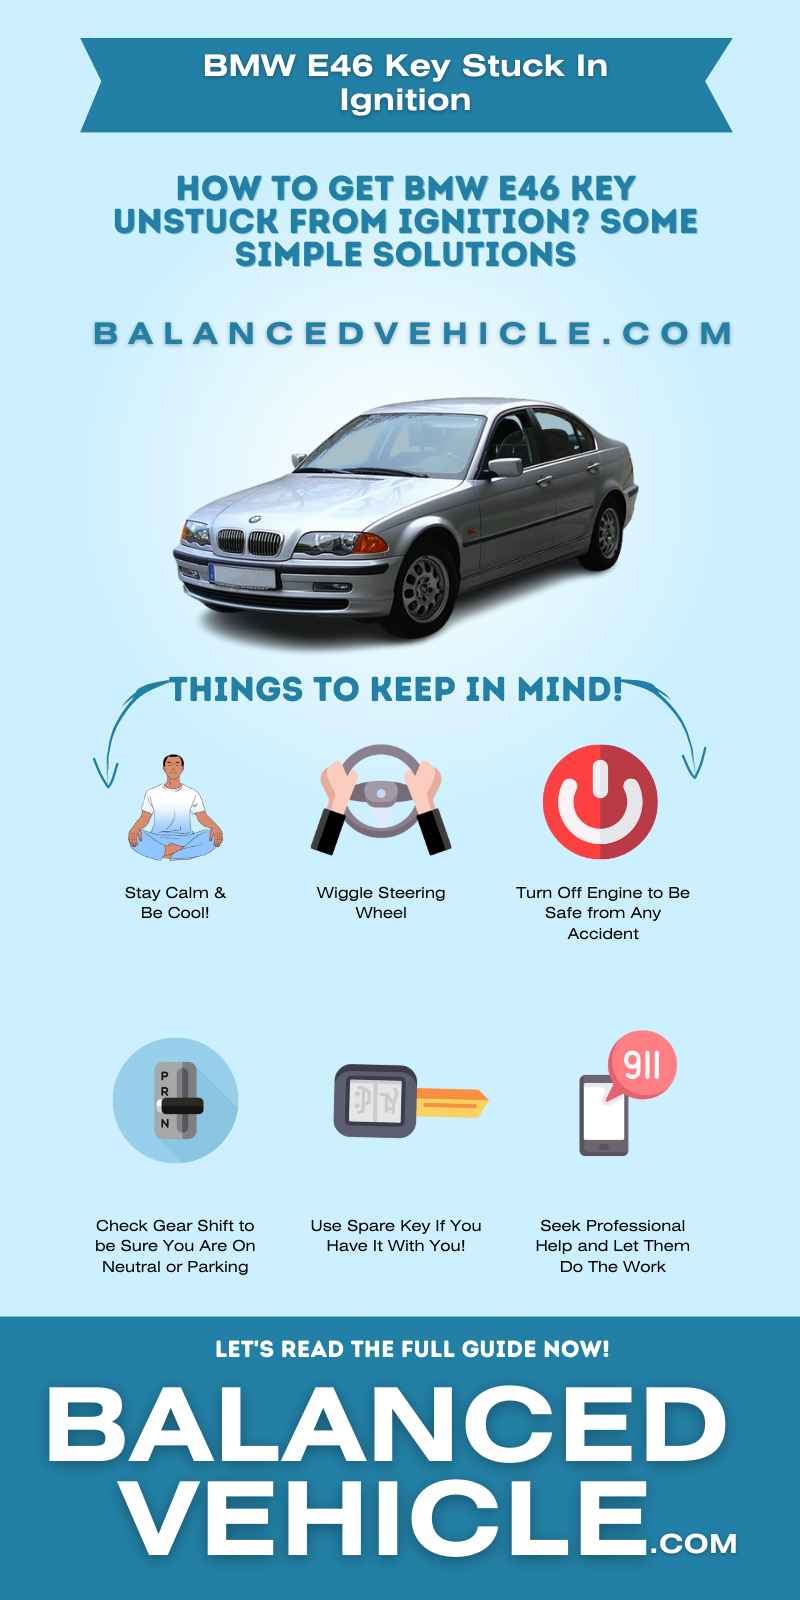 BMW E46 key stuck in ignition-Infographic